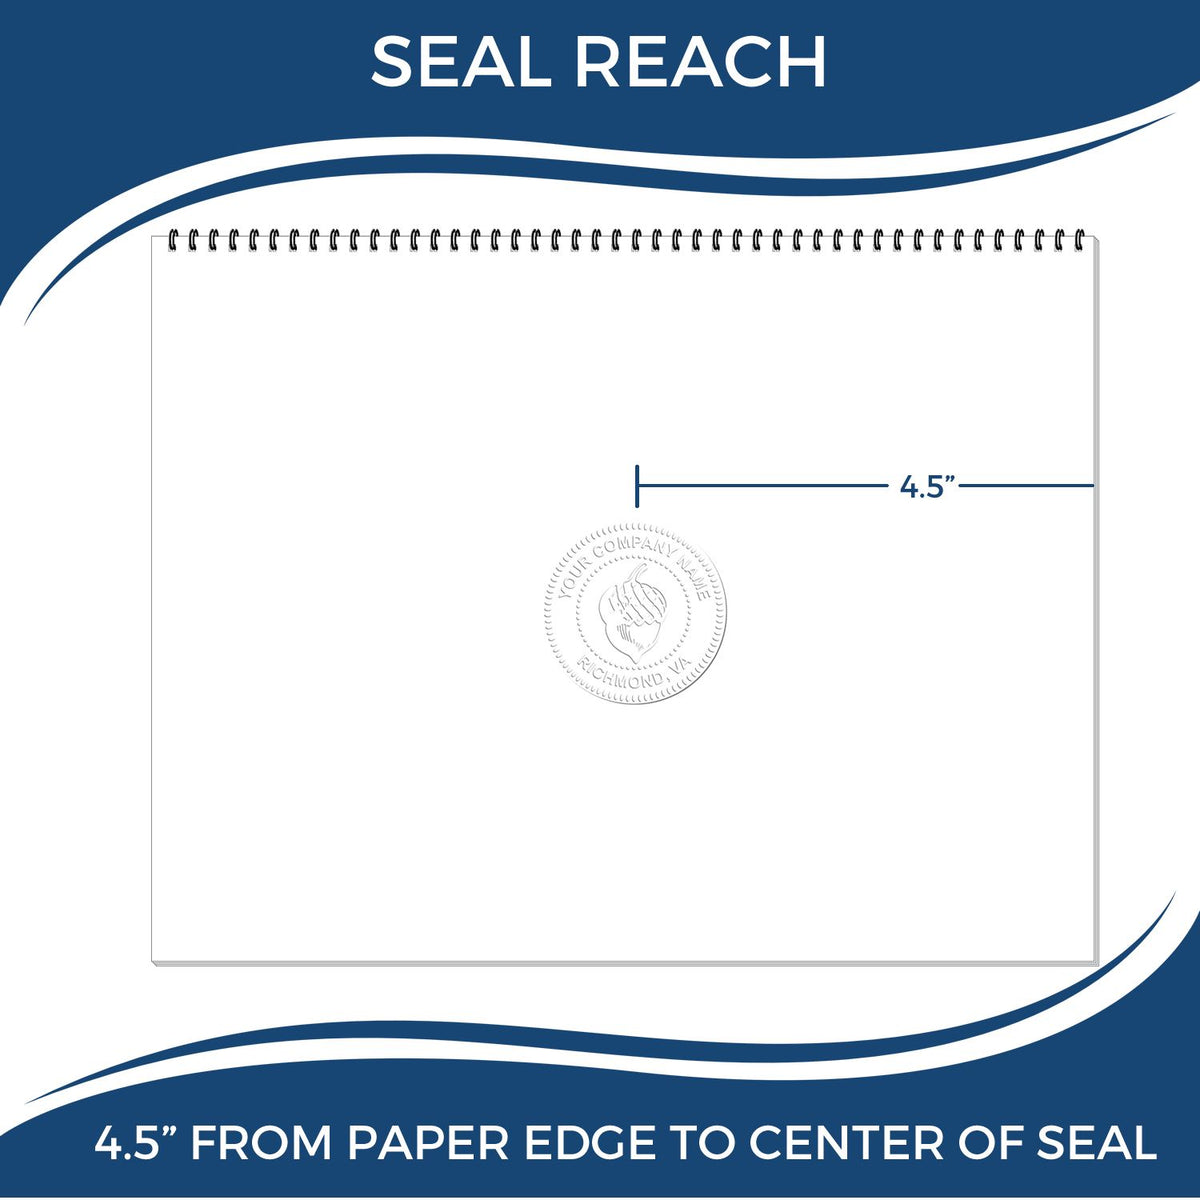 An infographic showing the seal reach which is represented by a ruler and a miniature seal image of the State of Arizona Extended Long Reach Engineer Seal